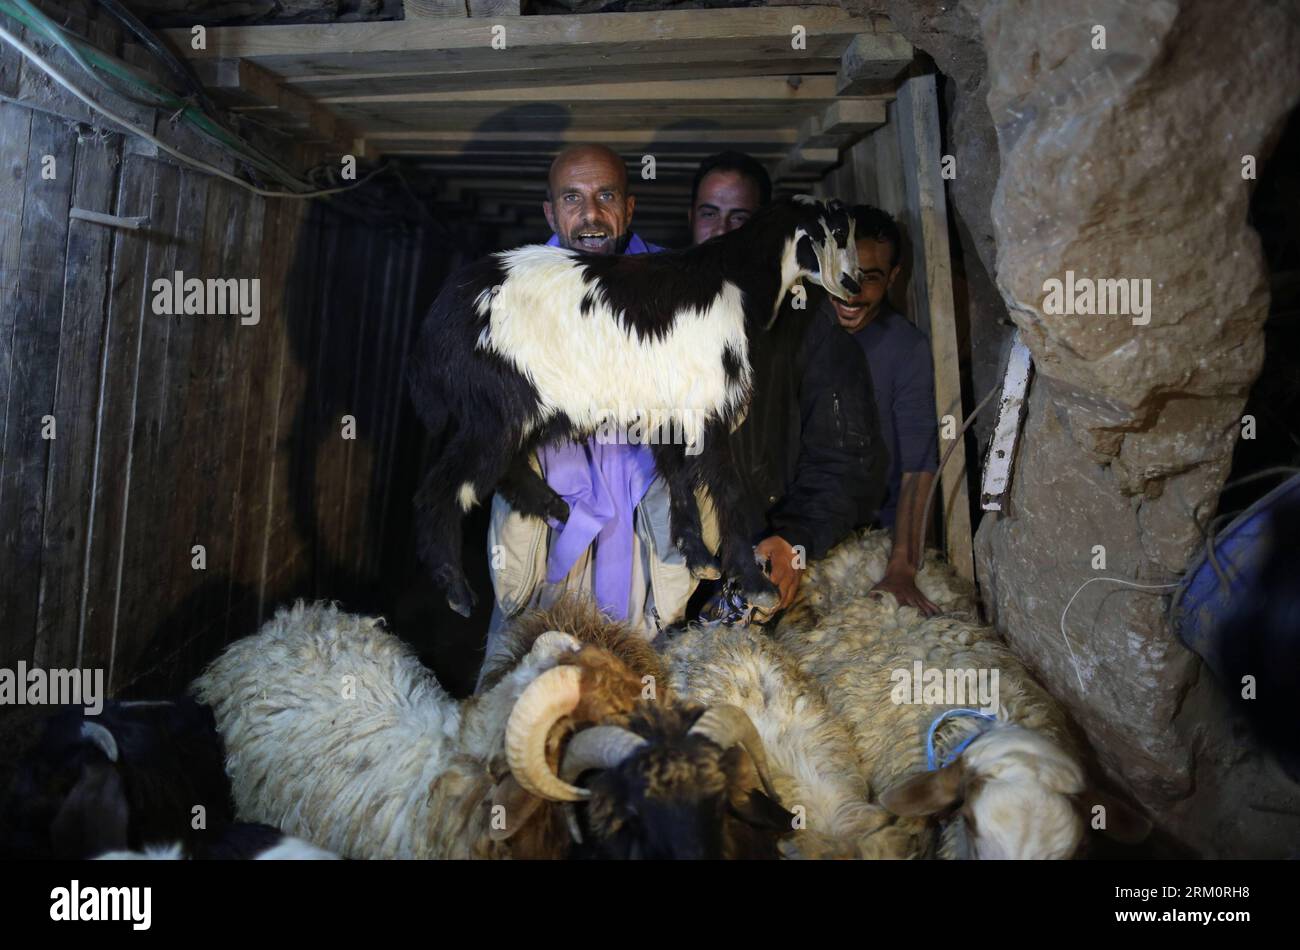 Bildnummer: 59466524  Datum: 02.04.2013  Copyright: imago/Xinhua (130402) -- GAZA, April 2, 2013 (Xinhua) -- Palestinian drive sheep through a smuggling tunnel between the Hamas-ruled Gaza Strip and Egypt in the southern Gaza Strip city of Rafah on April 2, 2013. The Egyptian army started to knock down Gaza smuggling tunnels last month after a high Egyptian court has urged the authorities in Cairo to tear down all the tunnels along the borders between Gaza and Egypt. (Xinhua/Wissam Nassar) (djj) MIDEAST-GAZA-SMUGGLING-TUNNELS PUBLICATIONxNOTxINxCHN Gesellschaft Gaza Gazastreifen Palästina Schm Stock Photo